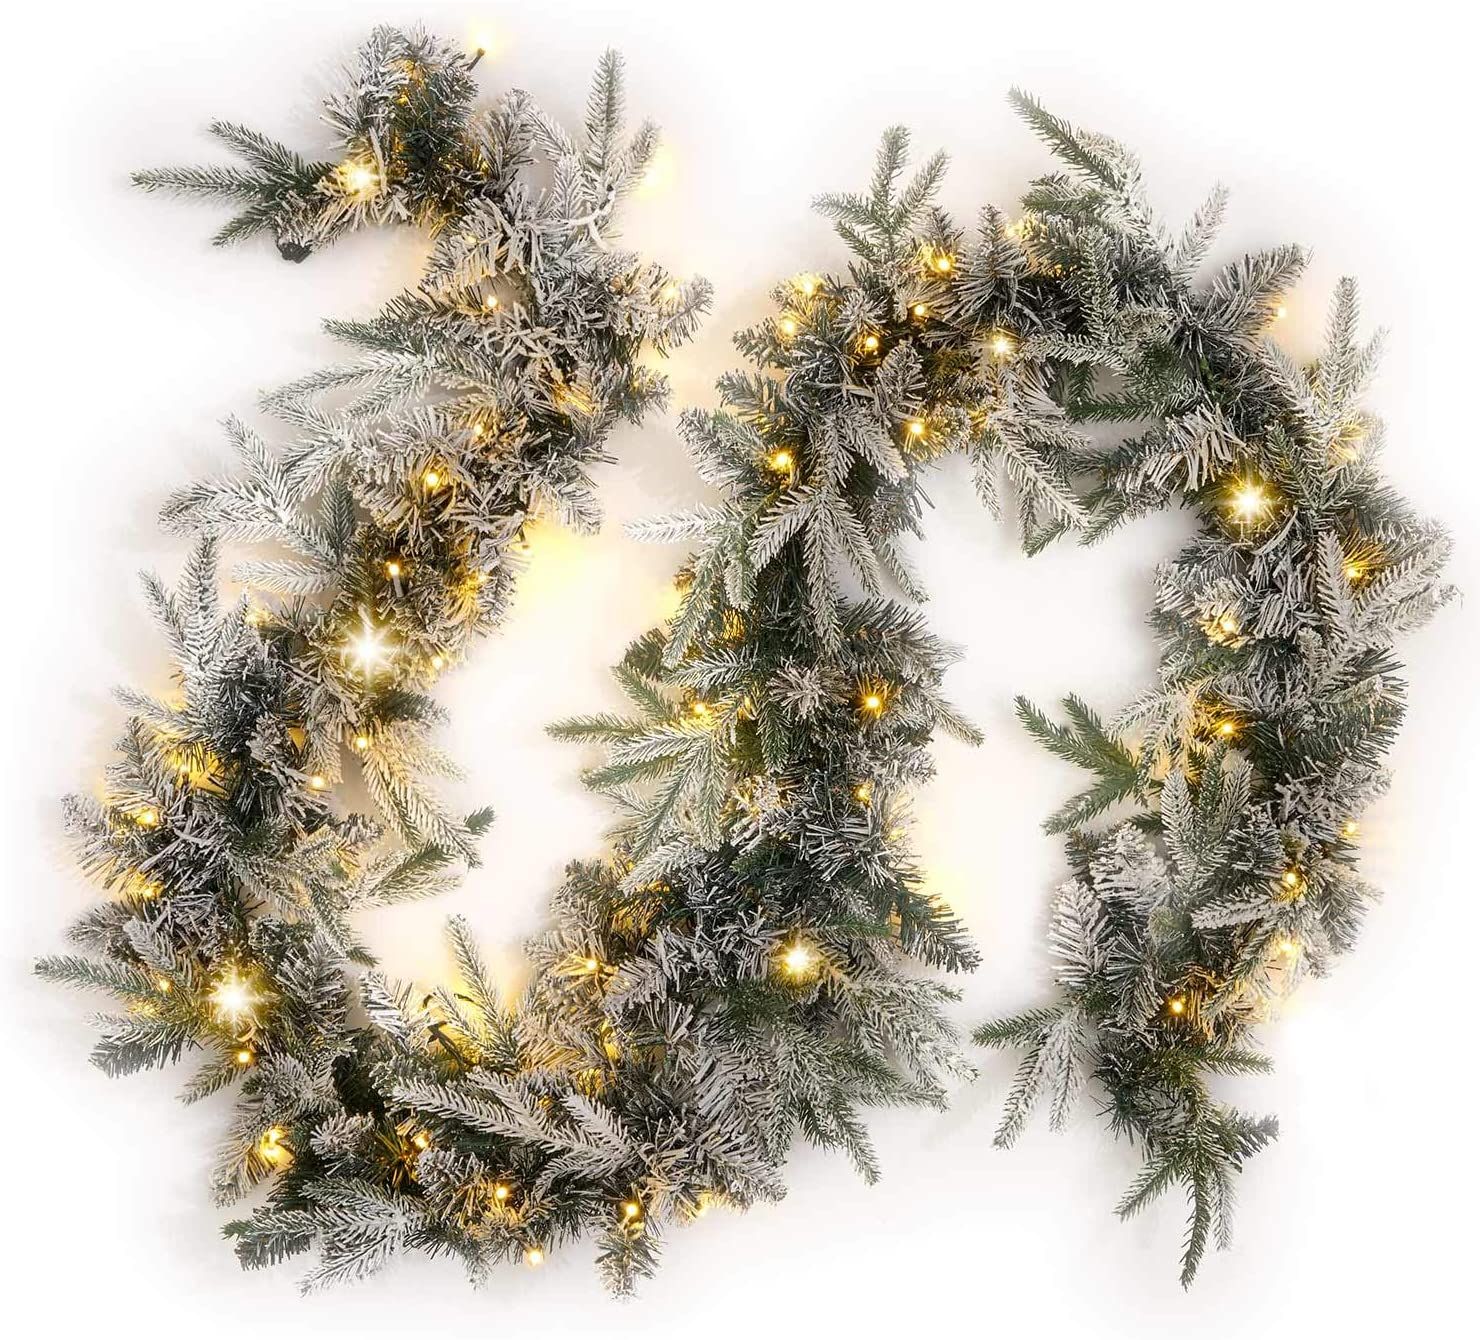 Flocked and Lighted Evergreen Garland